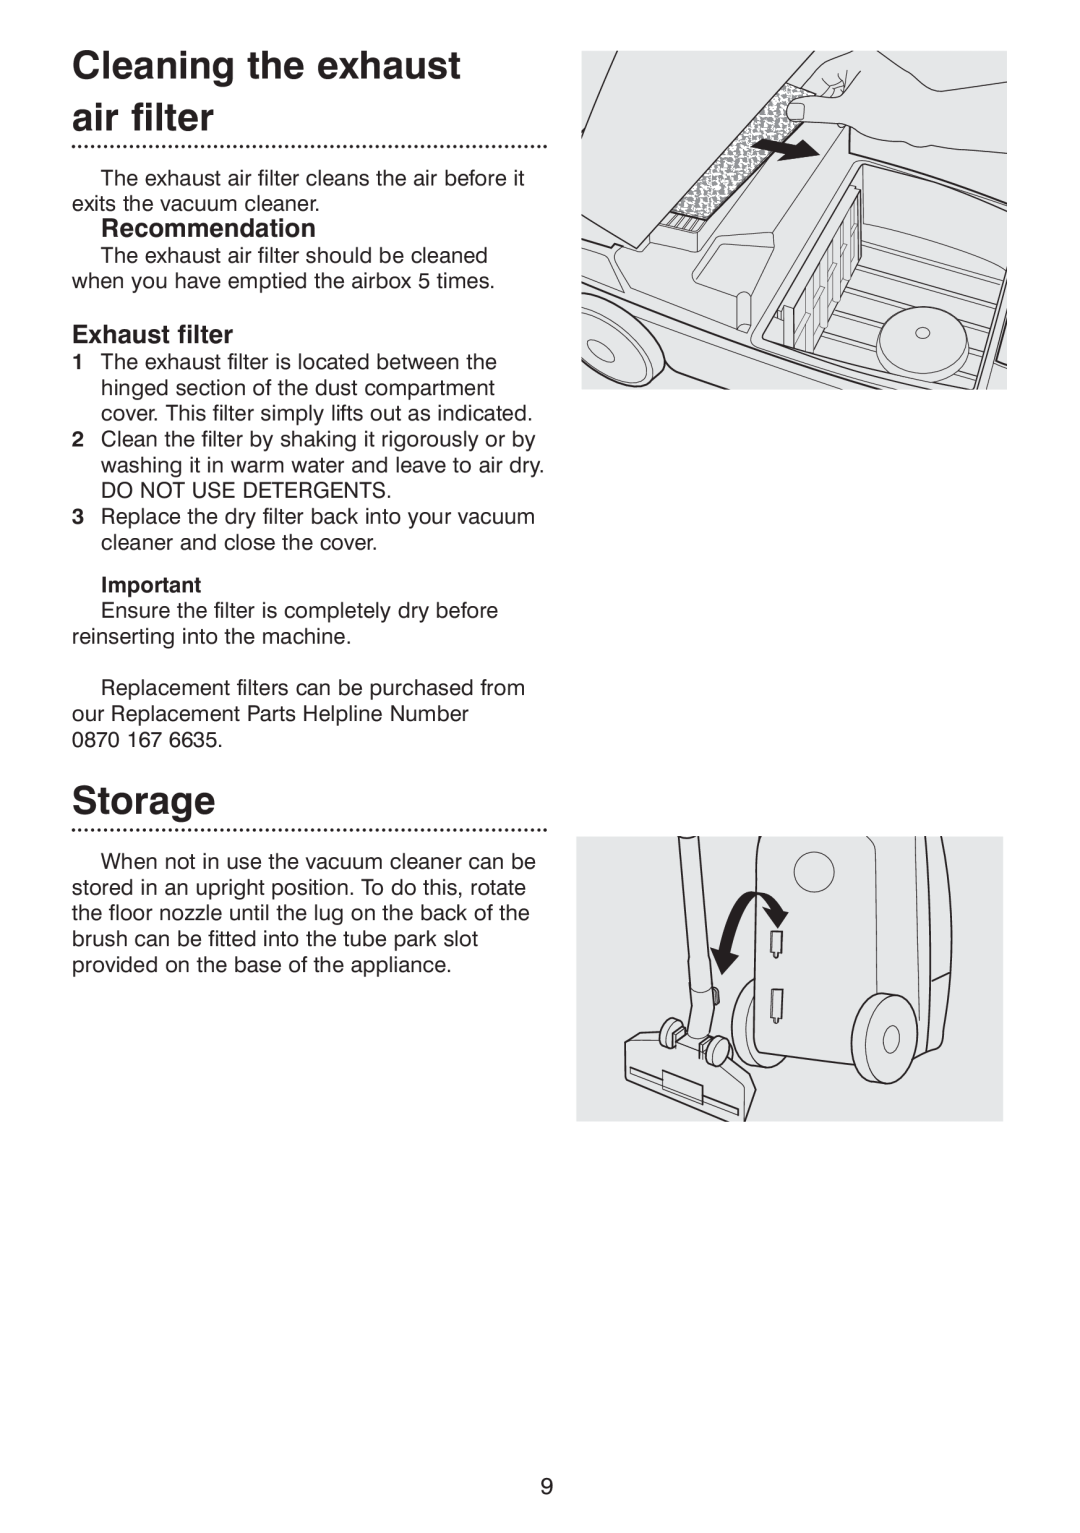 Morphy Richards Ecovac 70096 Rev 2 (Page 1) manual Cleaning the exhaust air filter, Storage, Recommendation, Exhaust filter 